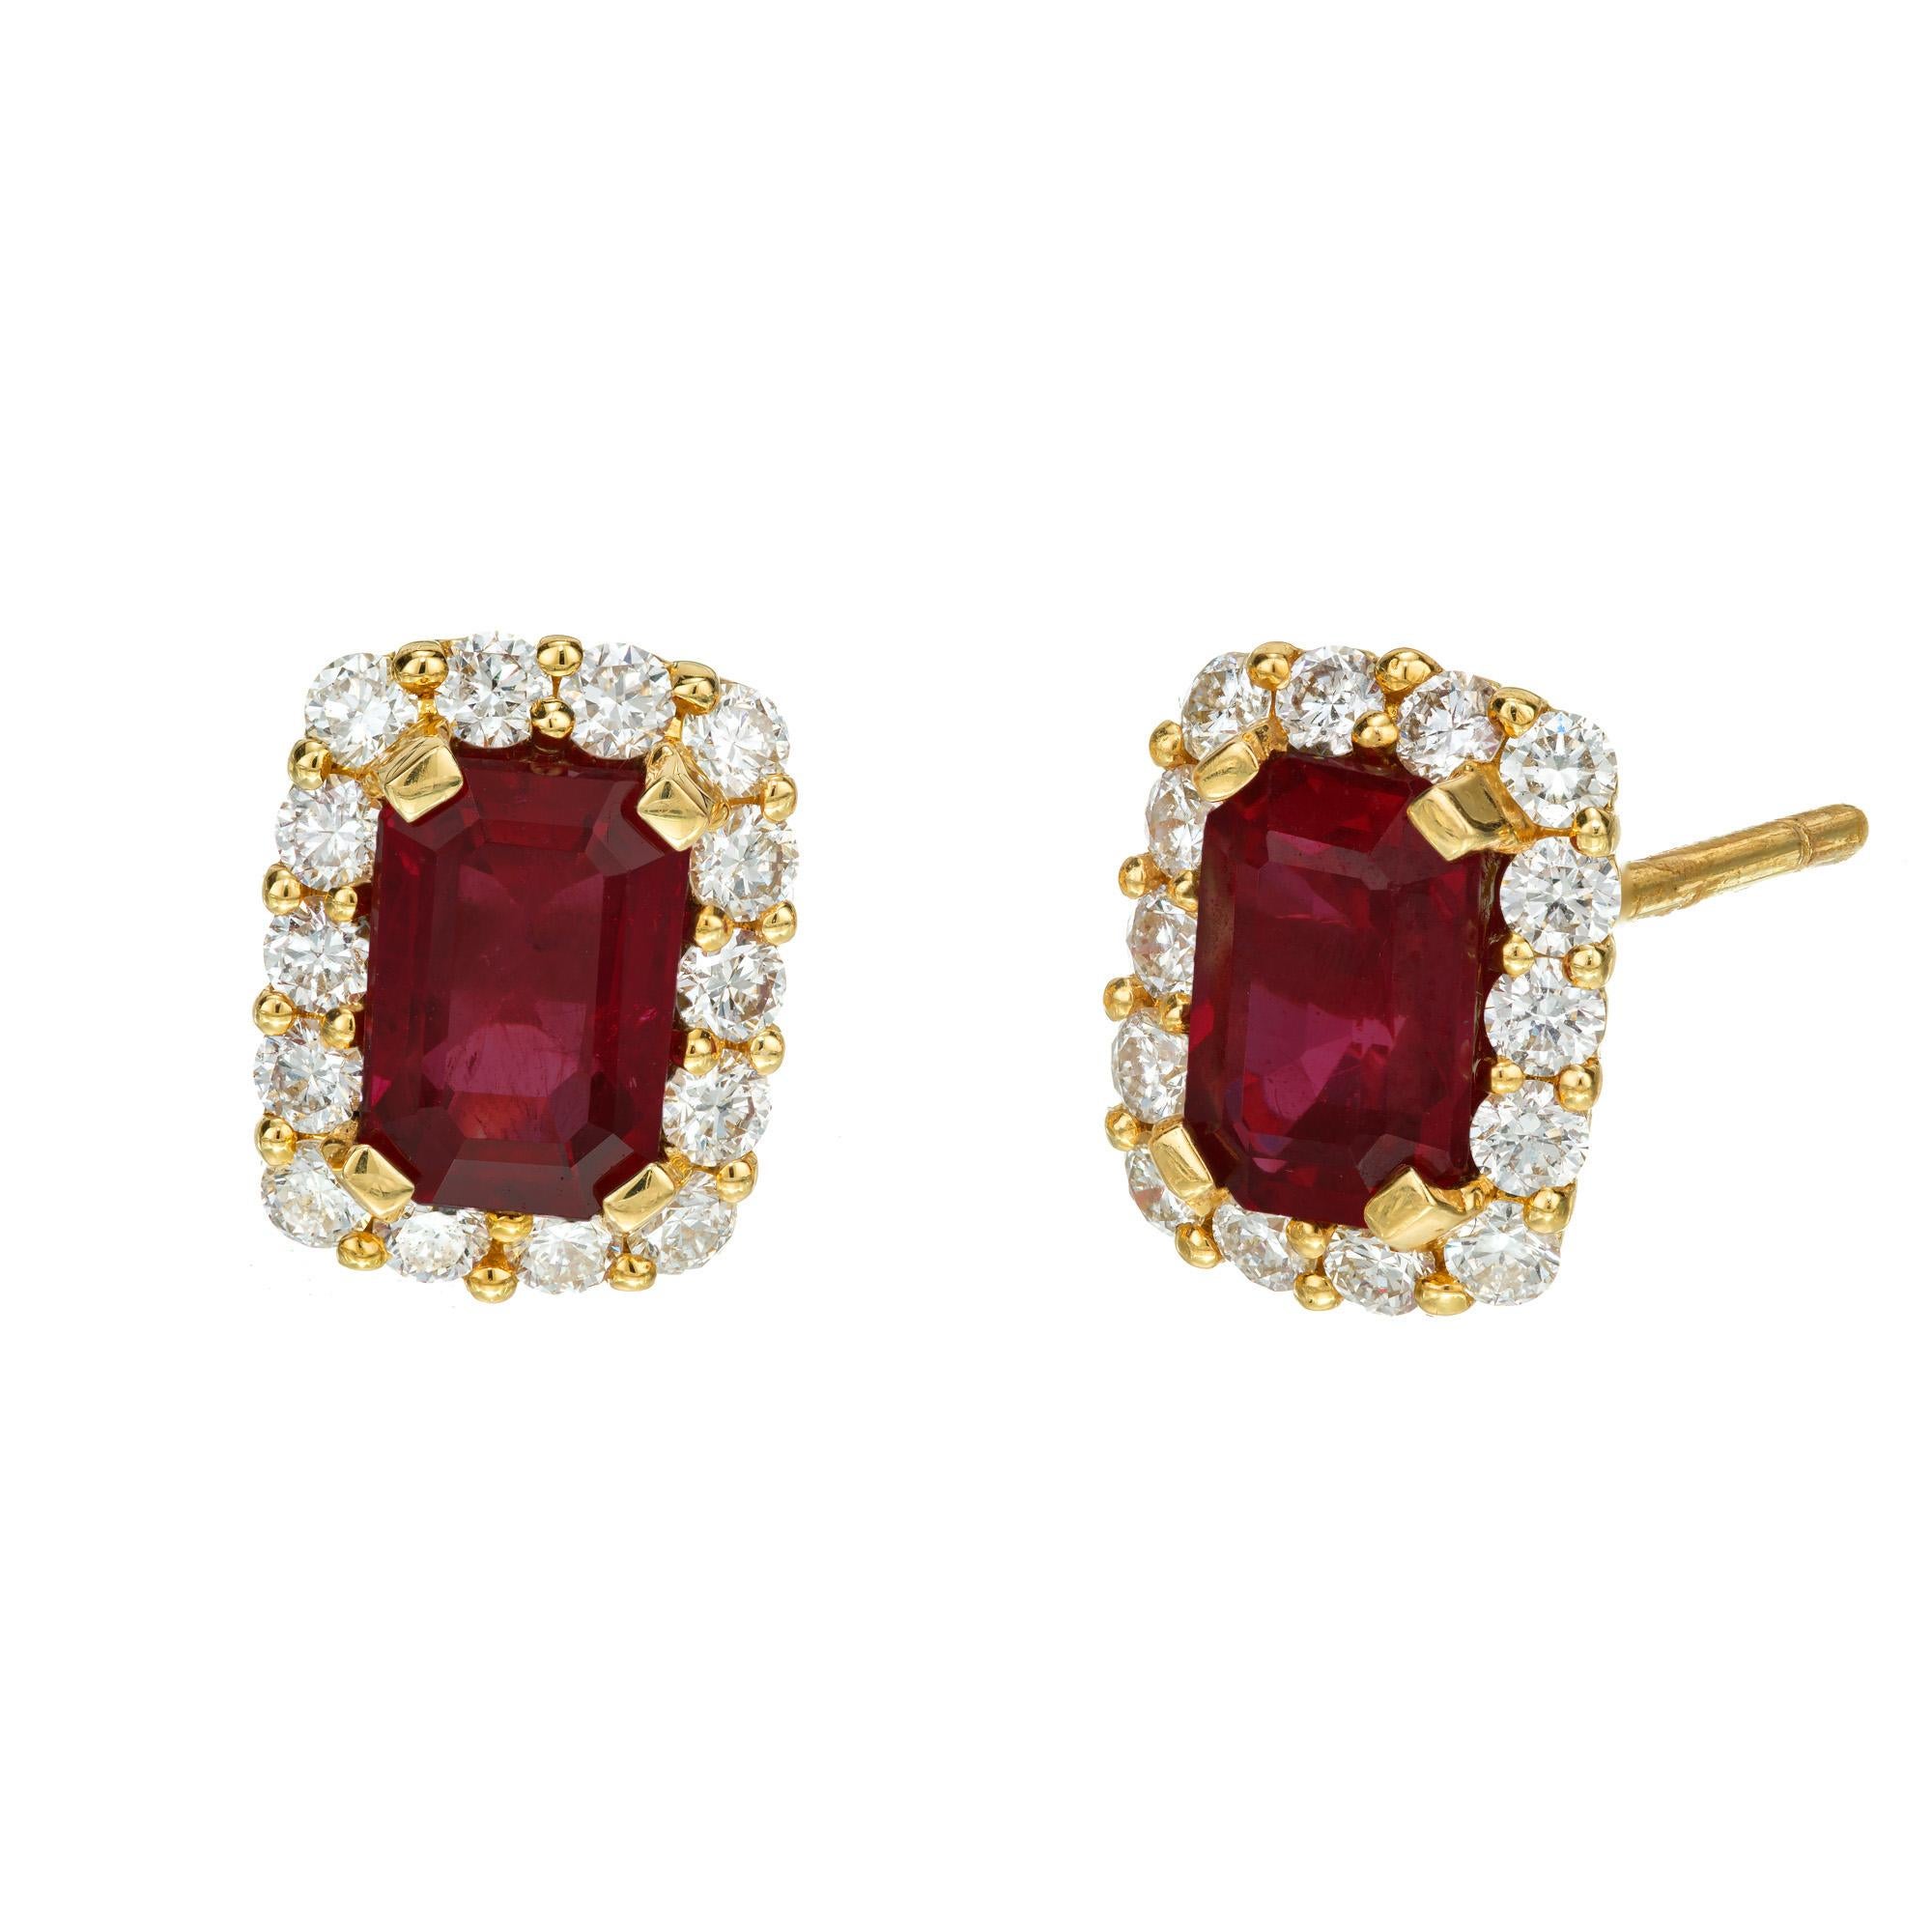 Classic red ruby diamond earrings. 2 octagonal red rubies, each with a halo of round brilliant cut diamonds in 14k yellow gold settings. Designed and crafted in the Peter Suchy workshop

2 octagonal red rubies, approx. 1.44cts GIA certificate #